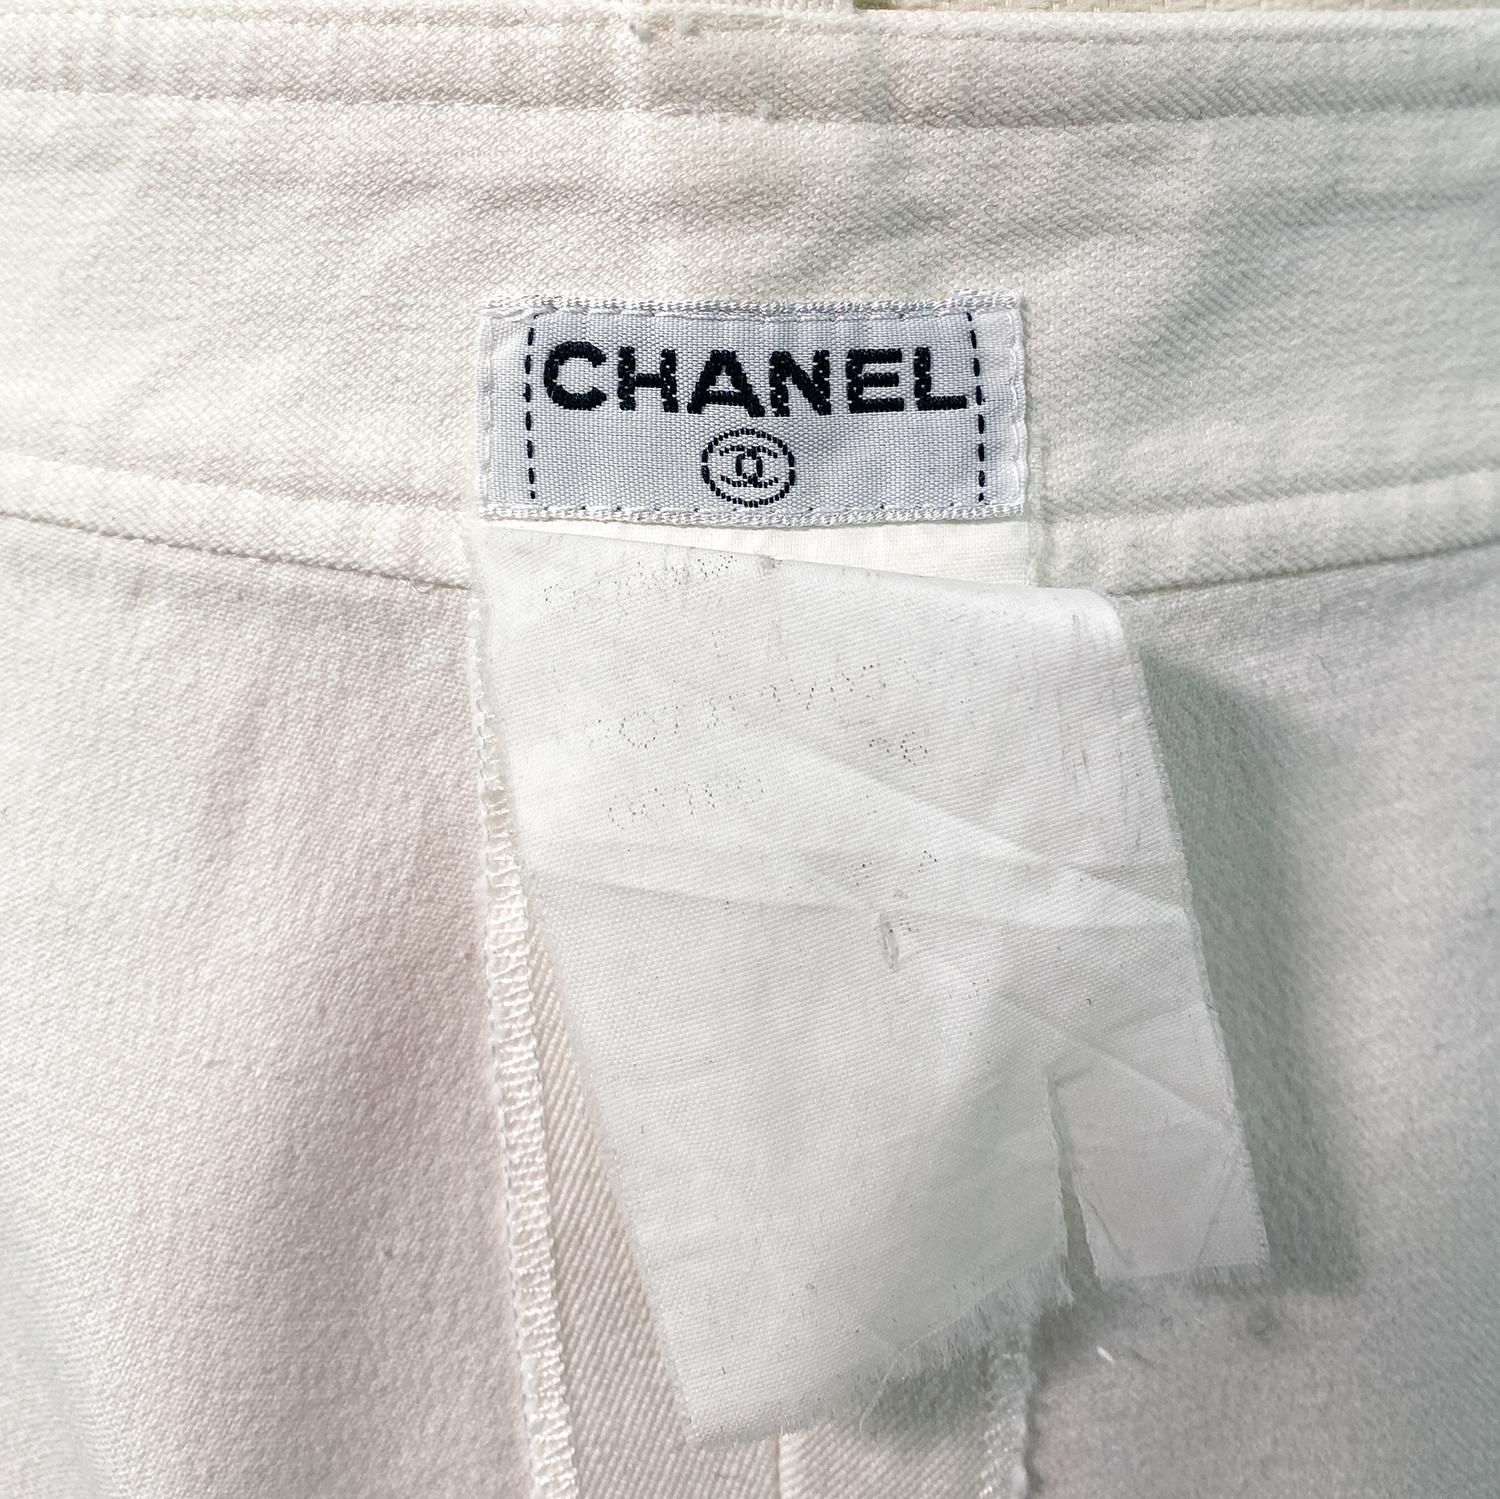 CHANEL BY KARL LAGERFELD S/S 1997 Vintage Runway Jodhpurs Documented Campaign  In Excellent Condition For Sale In Berlin, BE